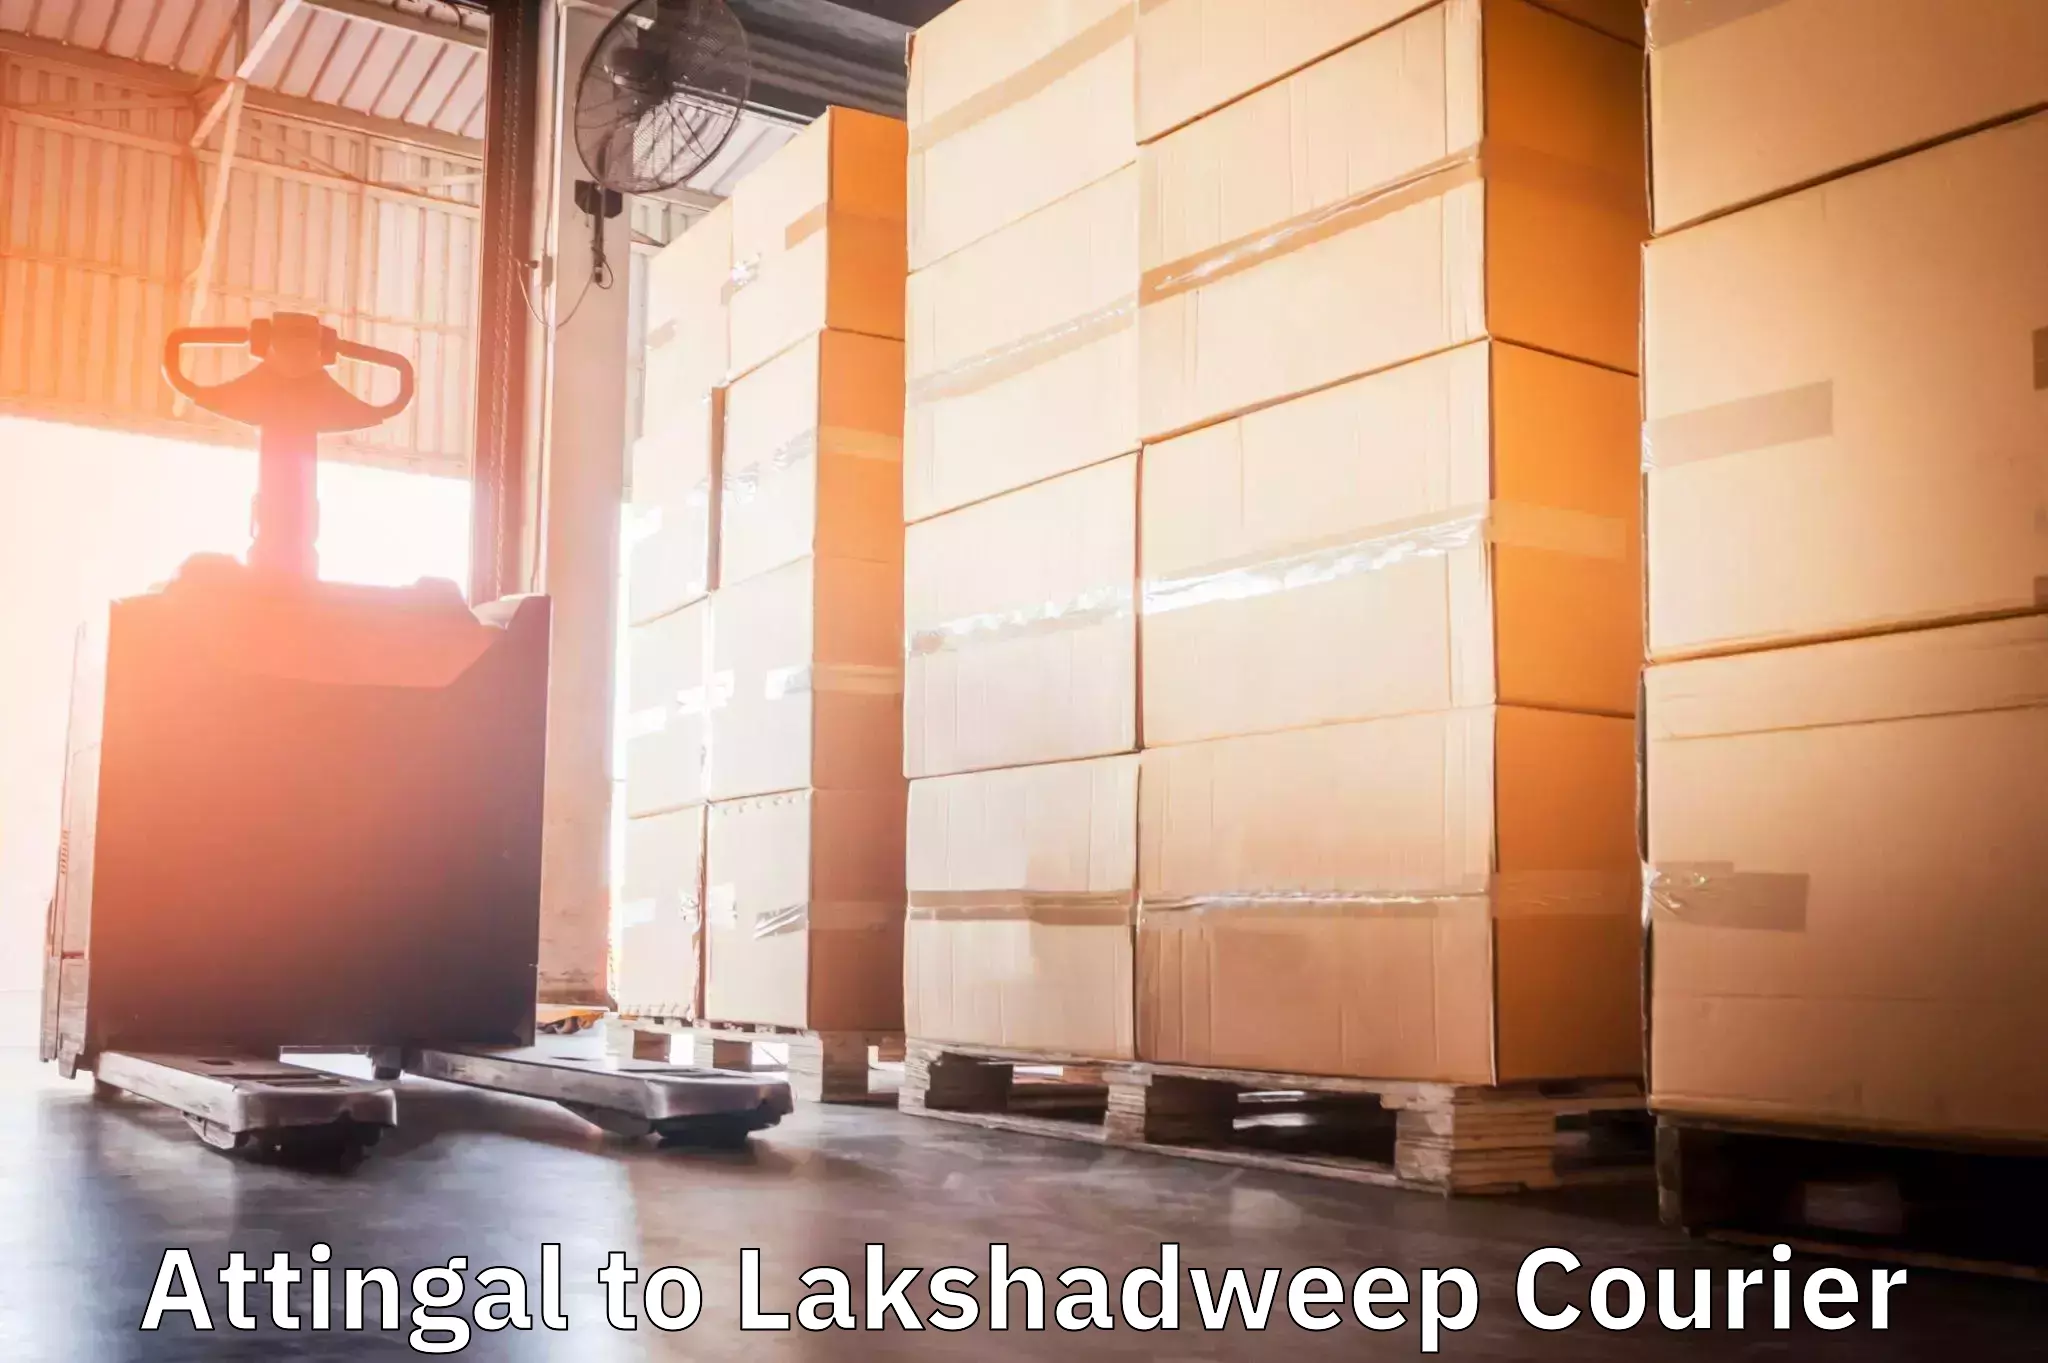 Delivery service partnership Attingal to Lakshadweep